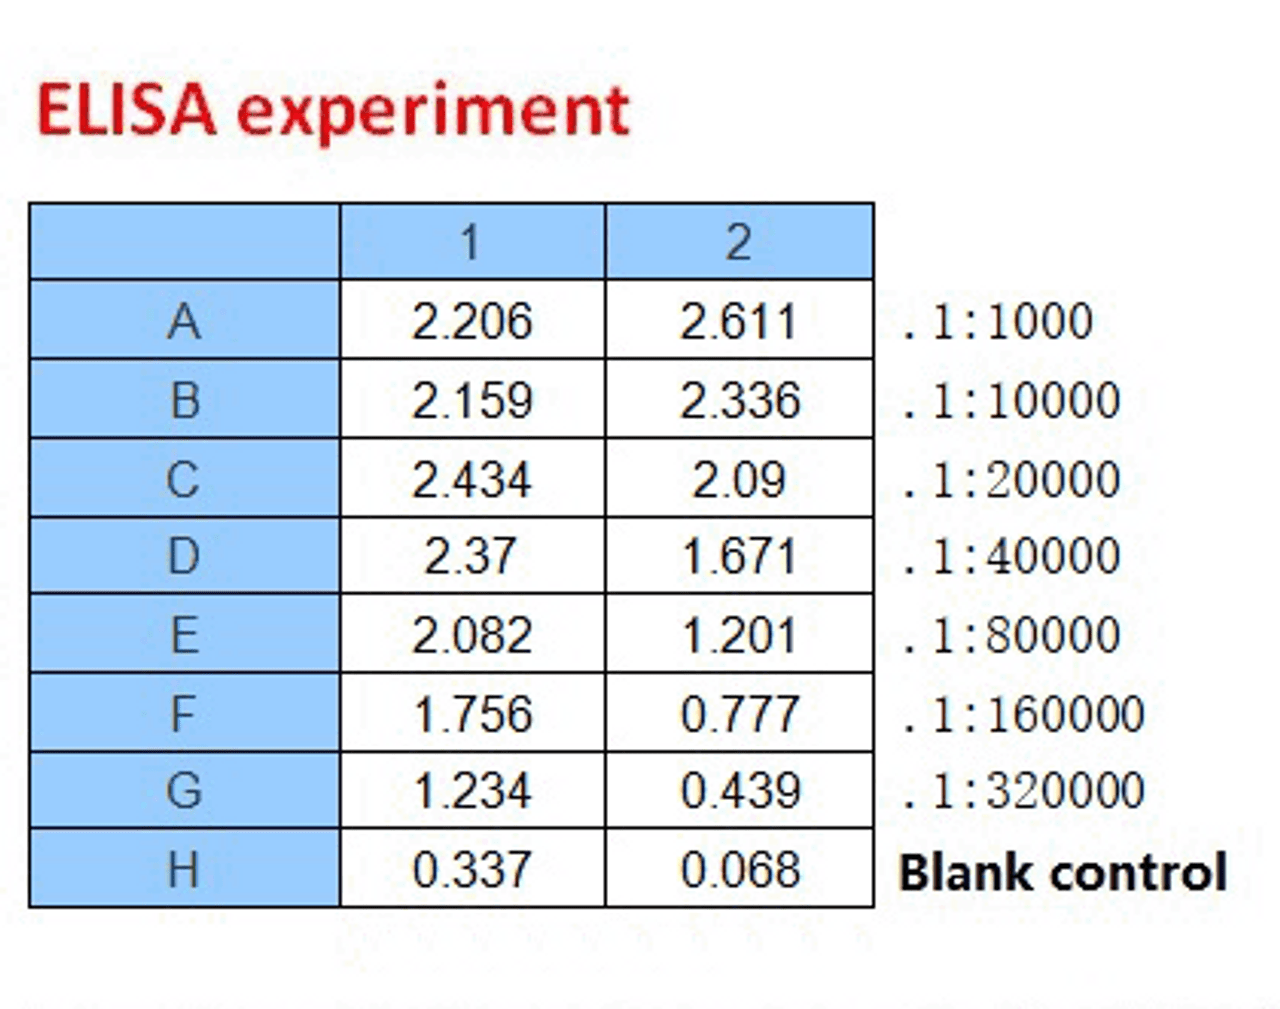 <strong>Figure 2 ELISA Test</strong><br>
Coating original concentration: 2 ug/mL, 100 uL/well samples are column 1: SARS-CoV-2 (COVID-19) Spike-ECD Recombinant Protein, 10-011, and column 2: SARS-CoV-2 (COVID-19) Spike-RBD Recombinant Protein, 10-008.<br>Antibodies: SARS-CoV-2 (COVID-19) Spike-ECD/RBD Monoclonal Antibody, 10-556.<br>Secondary: Goat anti-human IgG HRP conjugate at 1:10000 dilution.<br>Develop: 15min, 100 uL/well.<br>Stop: Stop buffer 50 uL/well.